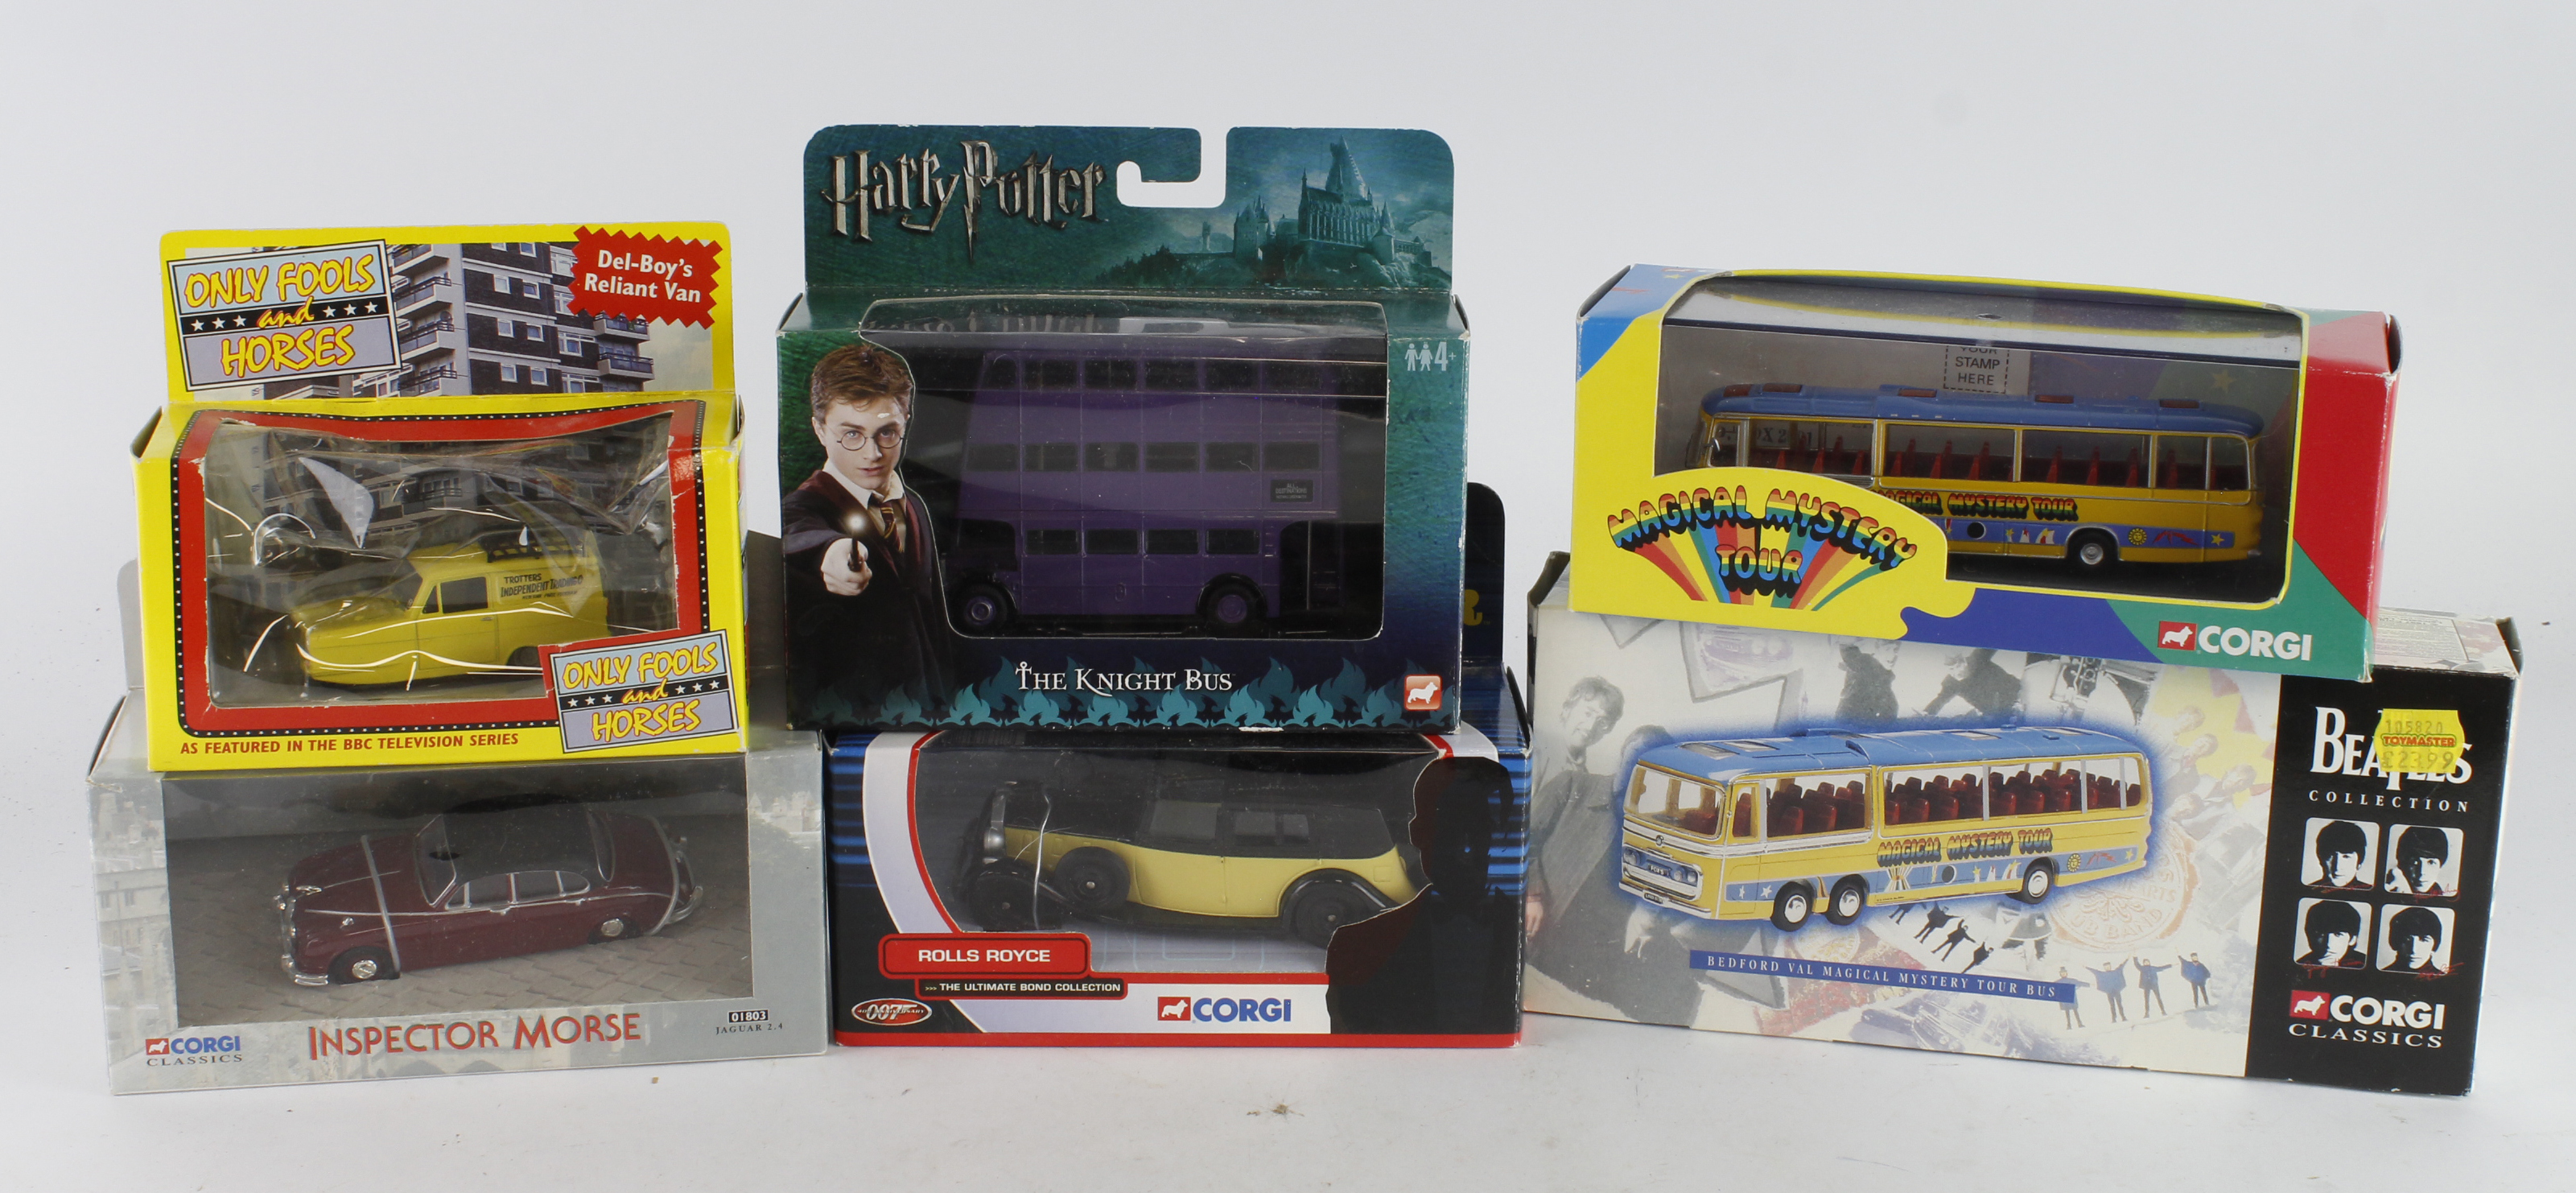 Film / TV related models. A group of six boxed models, including Corgi Beatles Magical Mystery